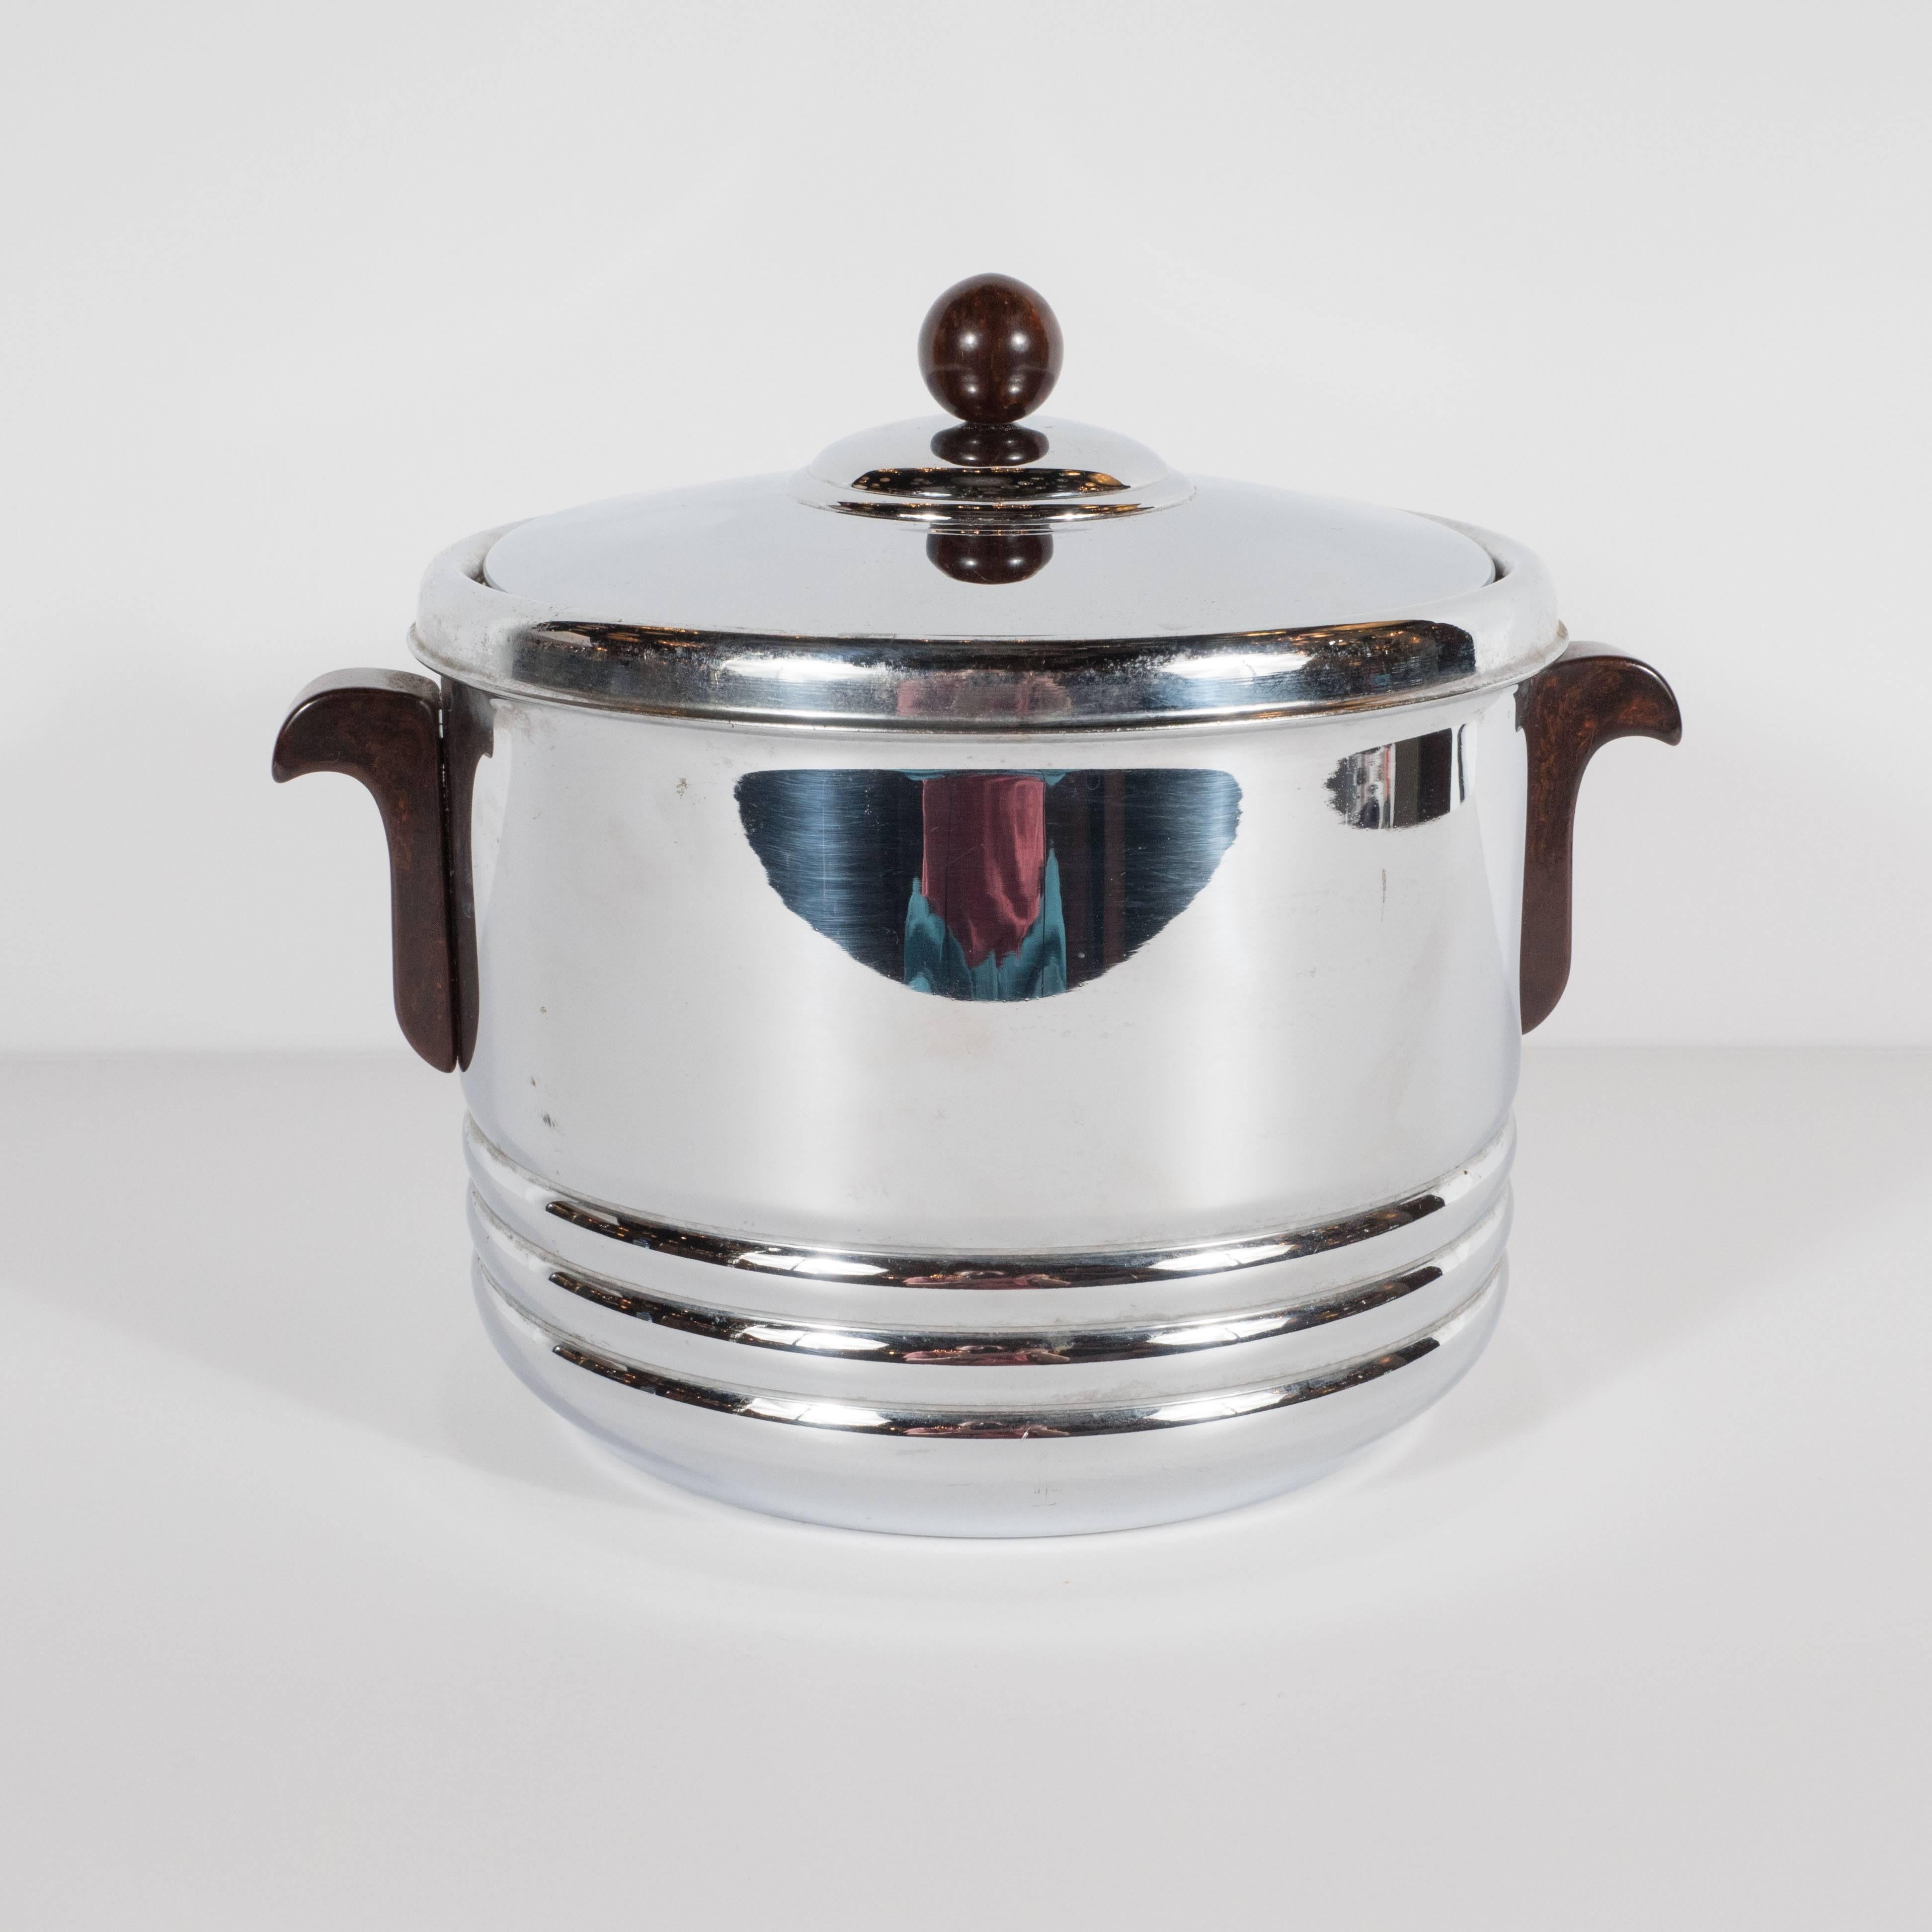 This sophisticated Art Deco has all of the distinguishing characteristics of Machine Age design in American at its finest. Constructed from lustrous chrome with a ceramic interior, the piece features the austere design that collectors of the period